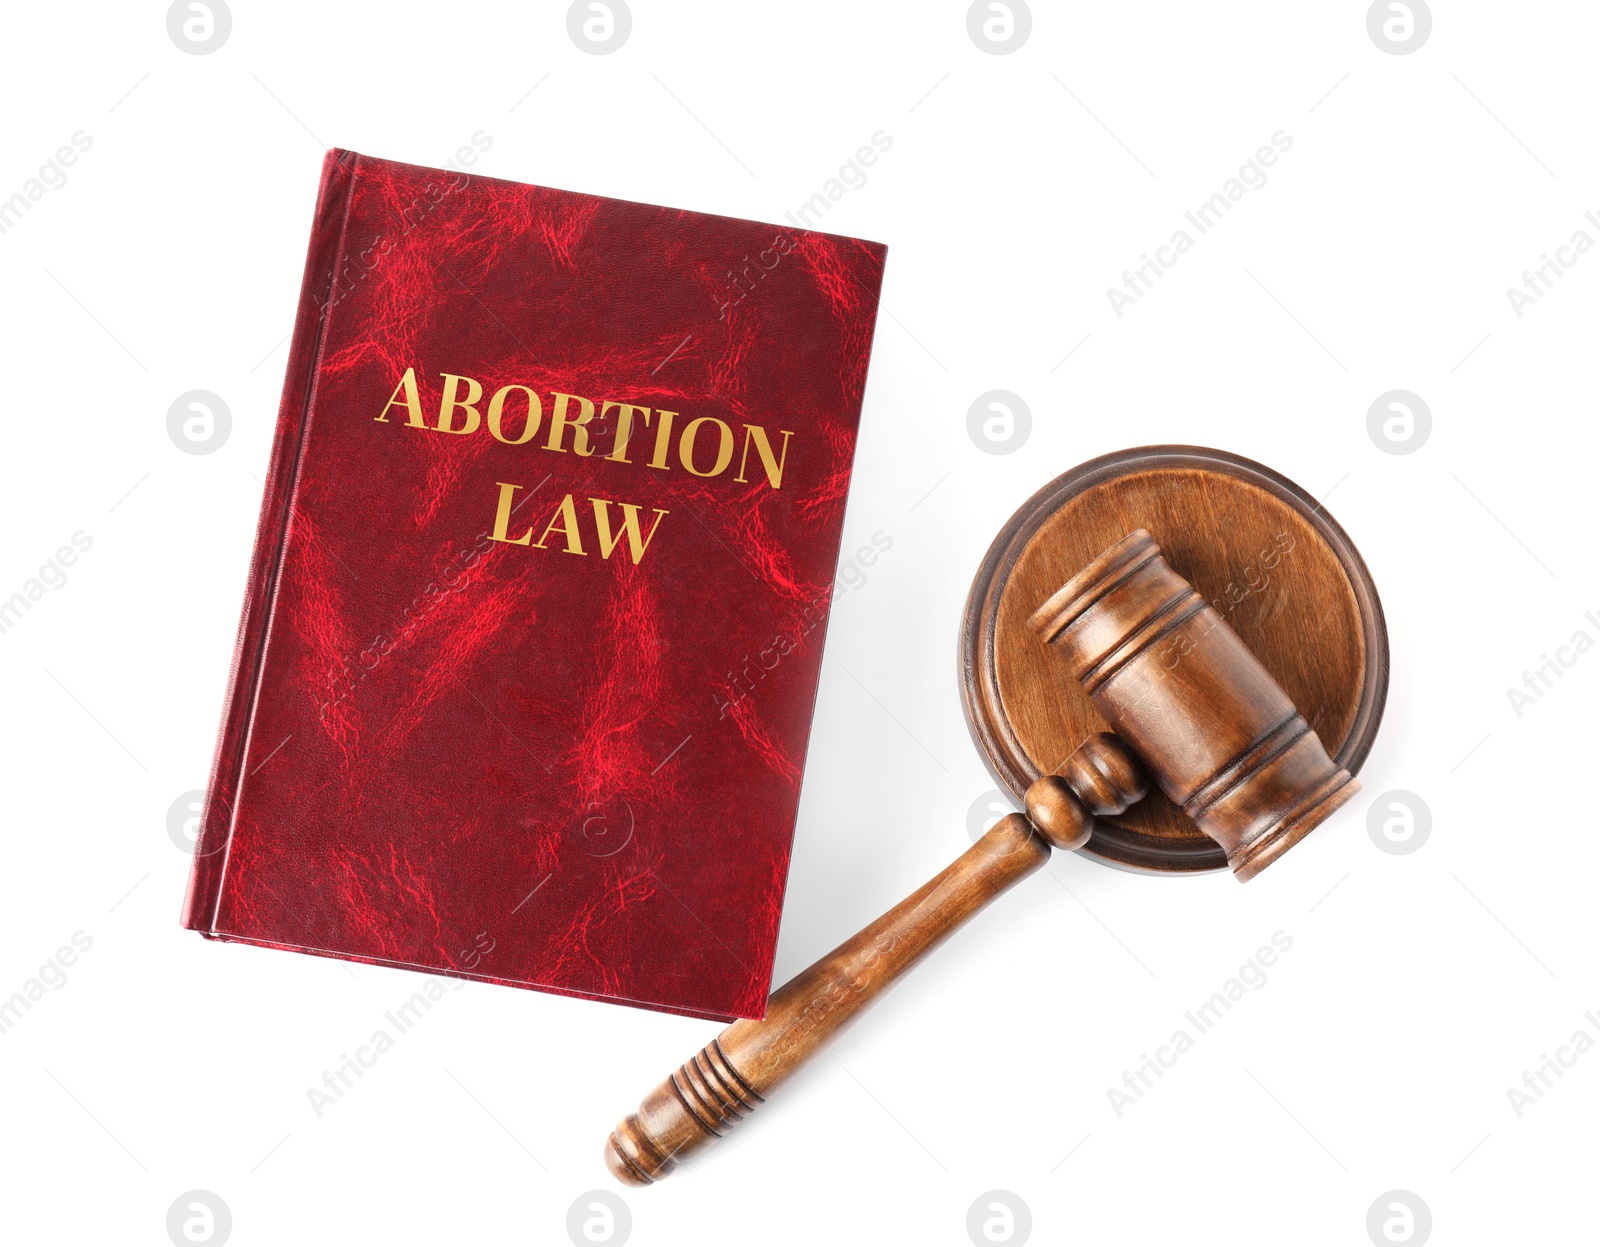 Image of Abortion Law book and gavel on white background, top view